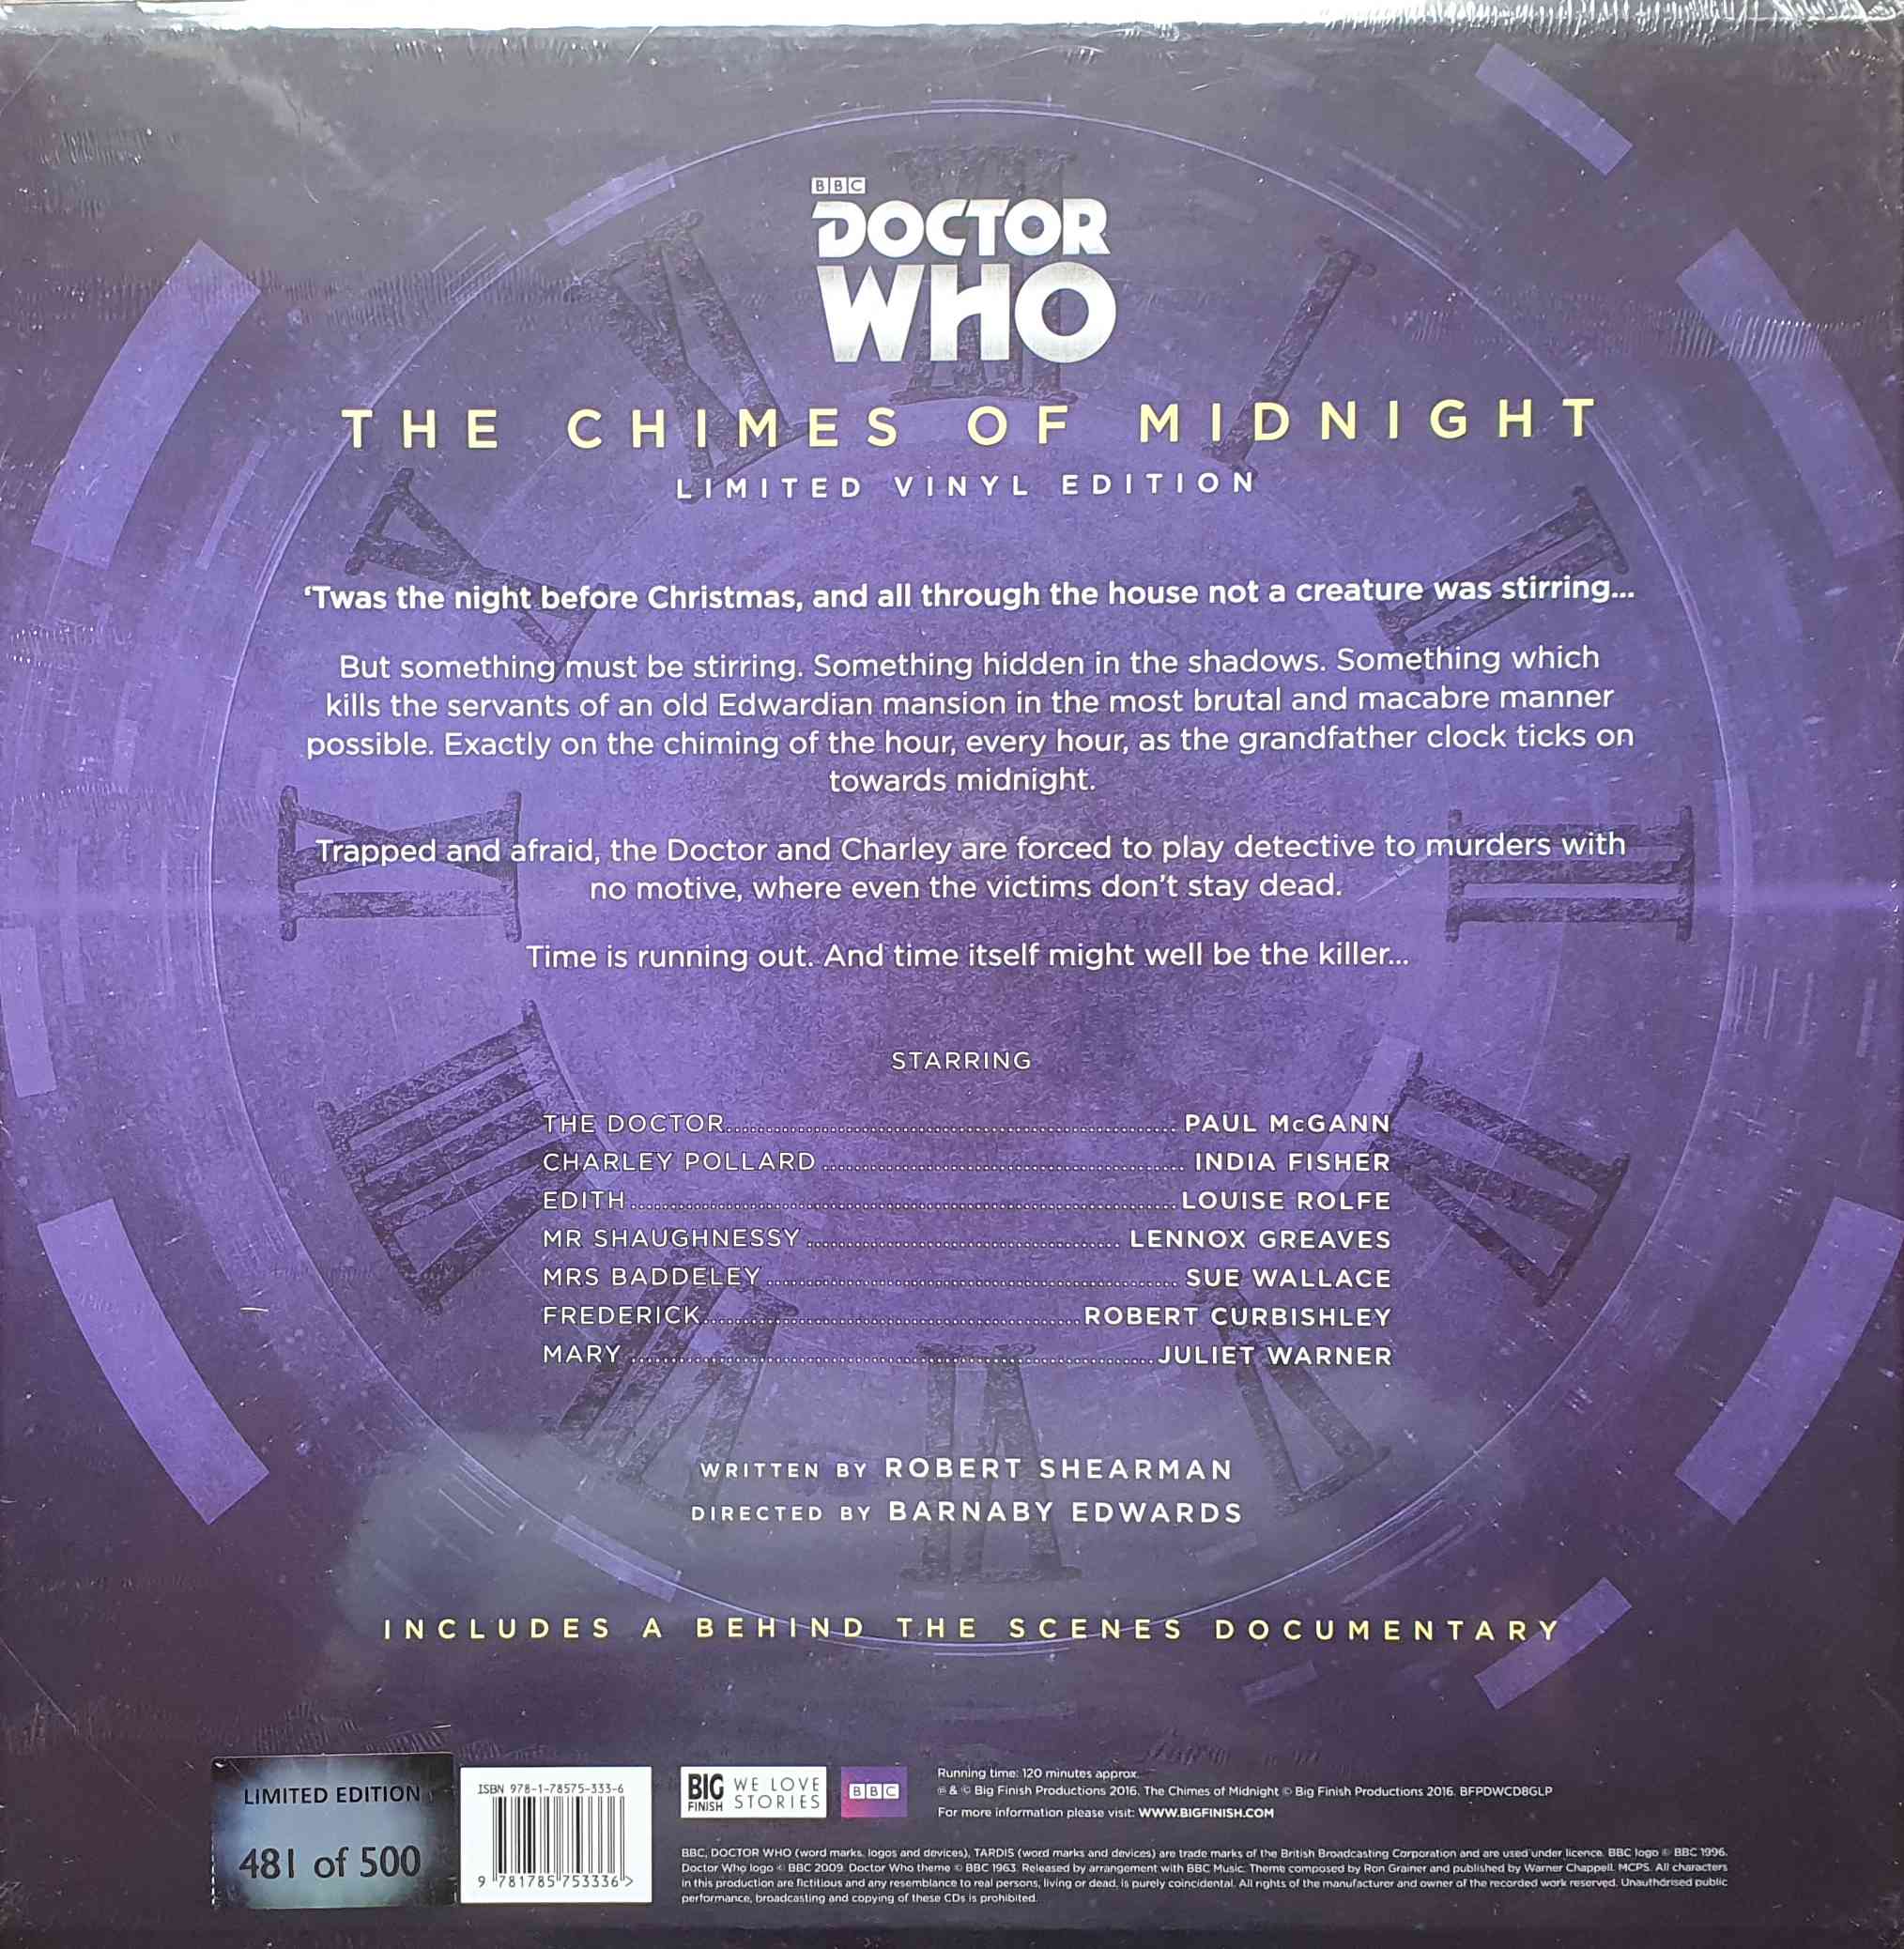 Picture of BFPDWCD8GLP Doctor Who - The chimes of midnight by artist Robert Shearman from the BBC records and Tapes library